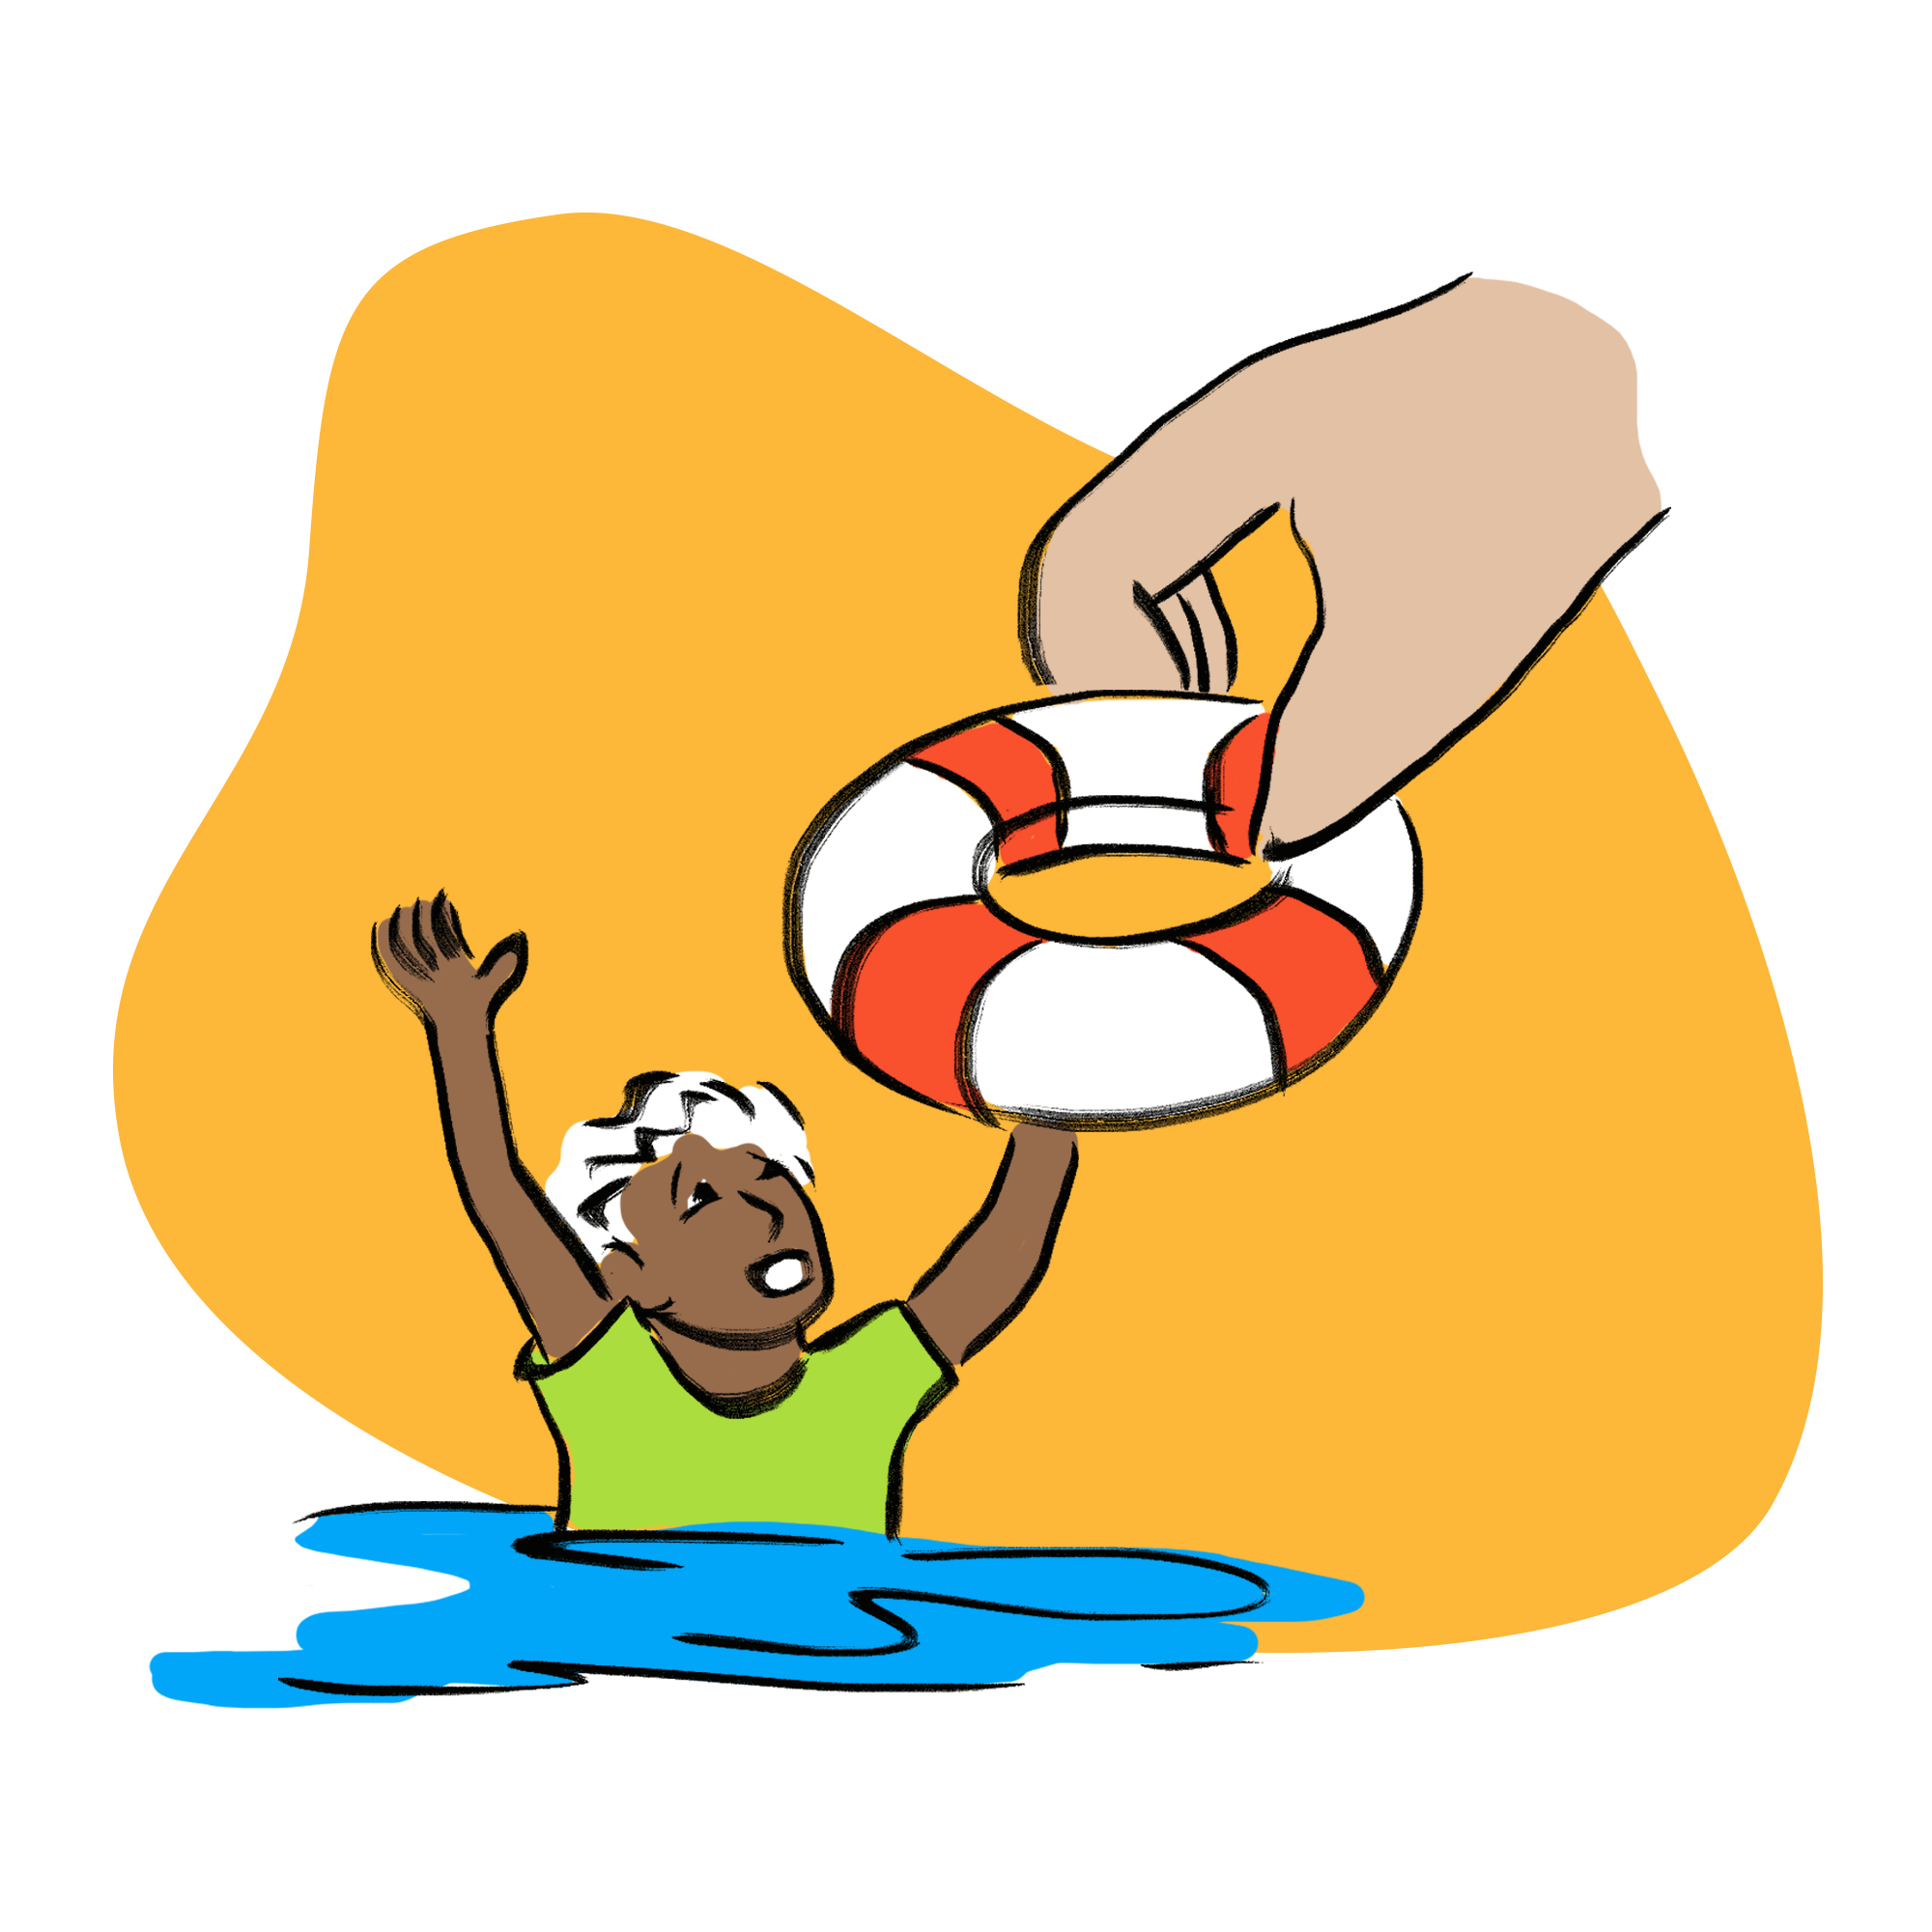 Child with a lifebuoy